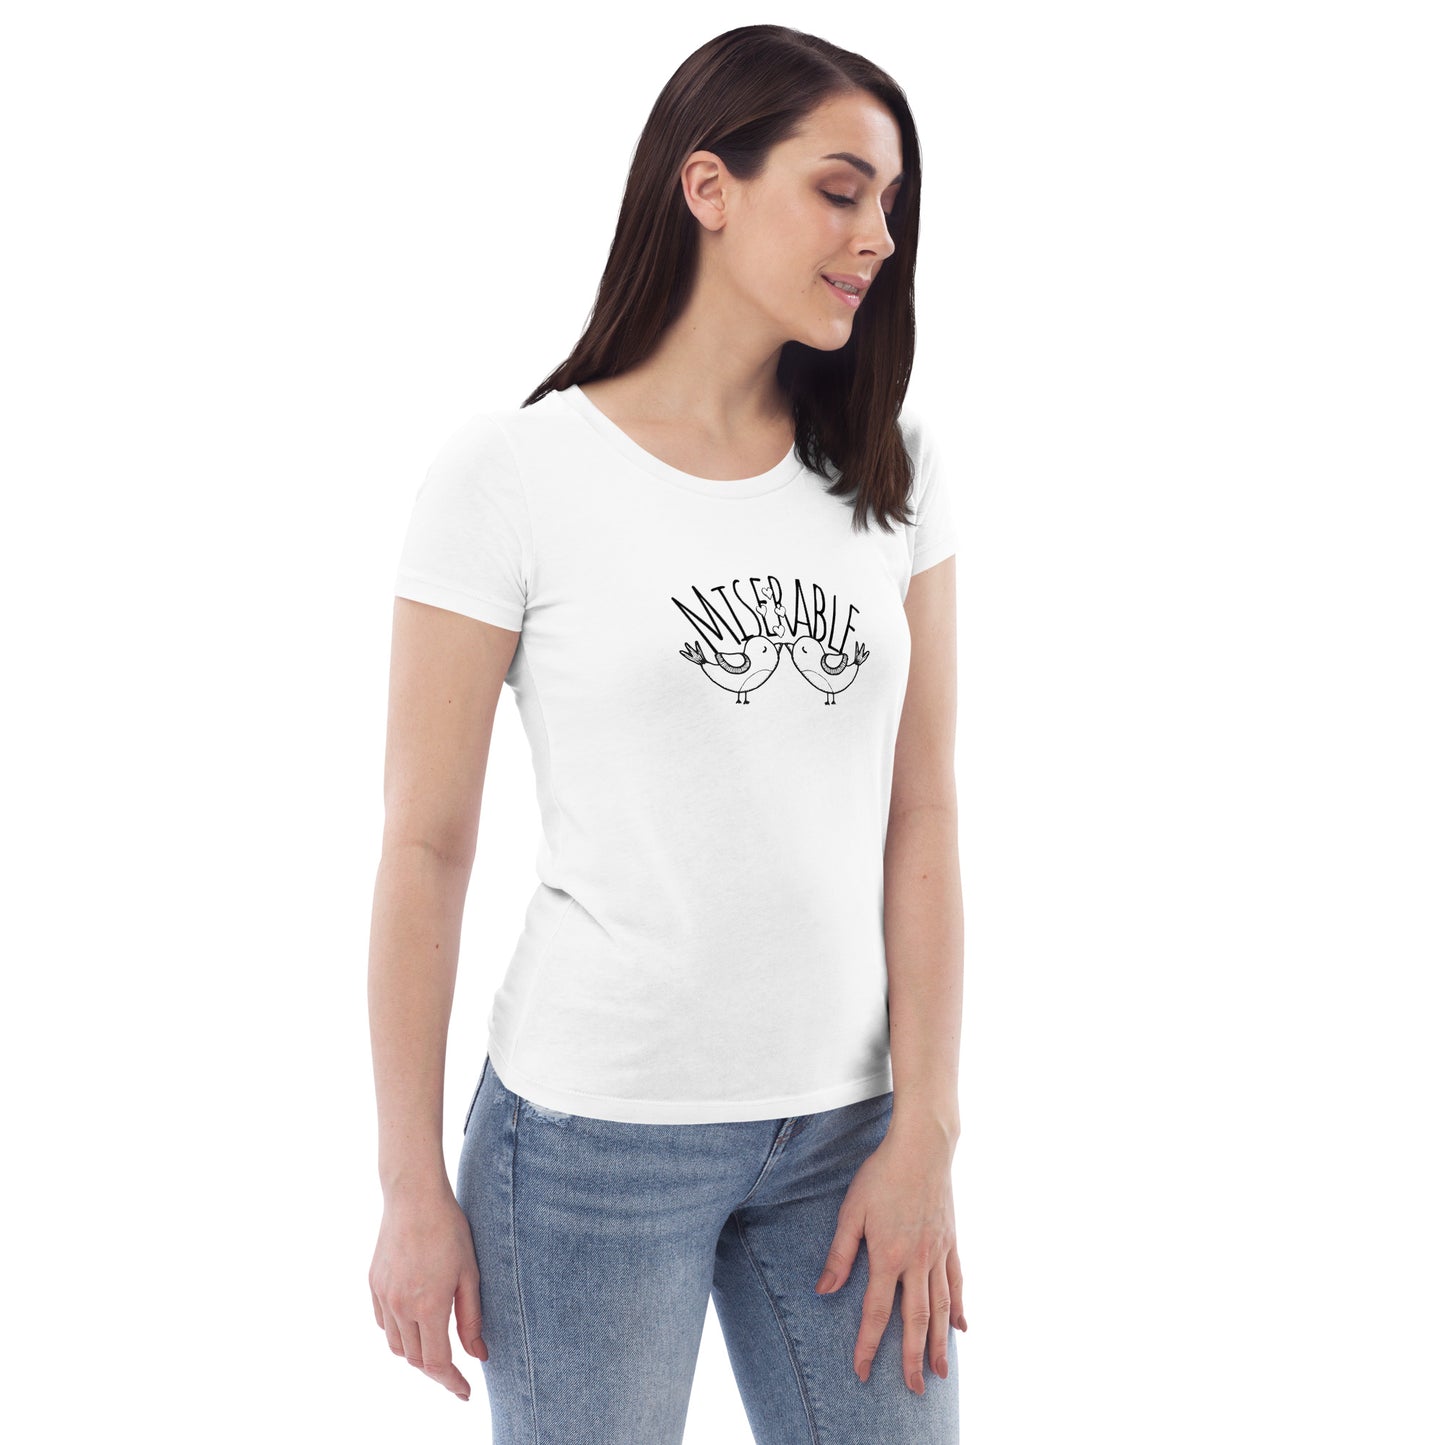 Miserable Love Birds - Women's fitted eco tee